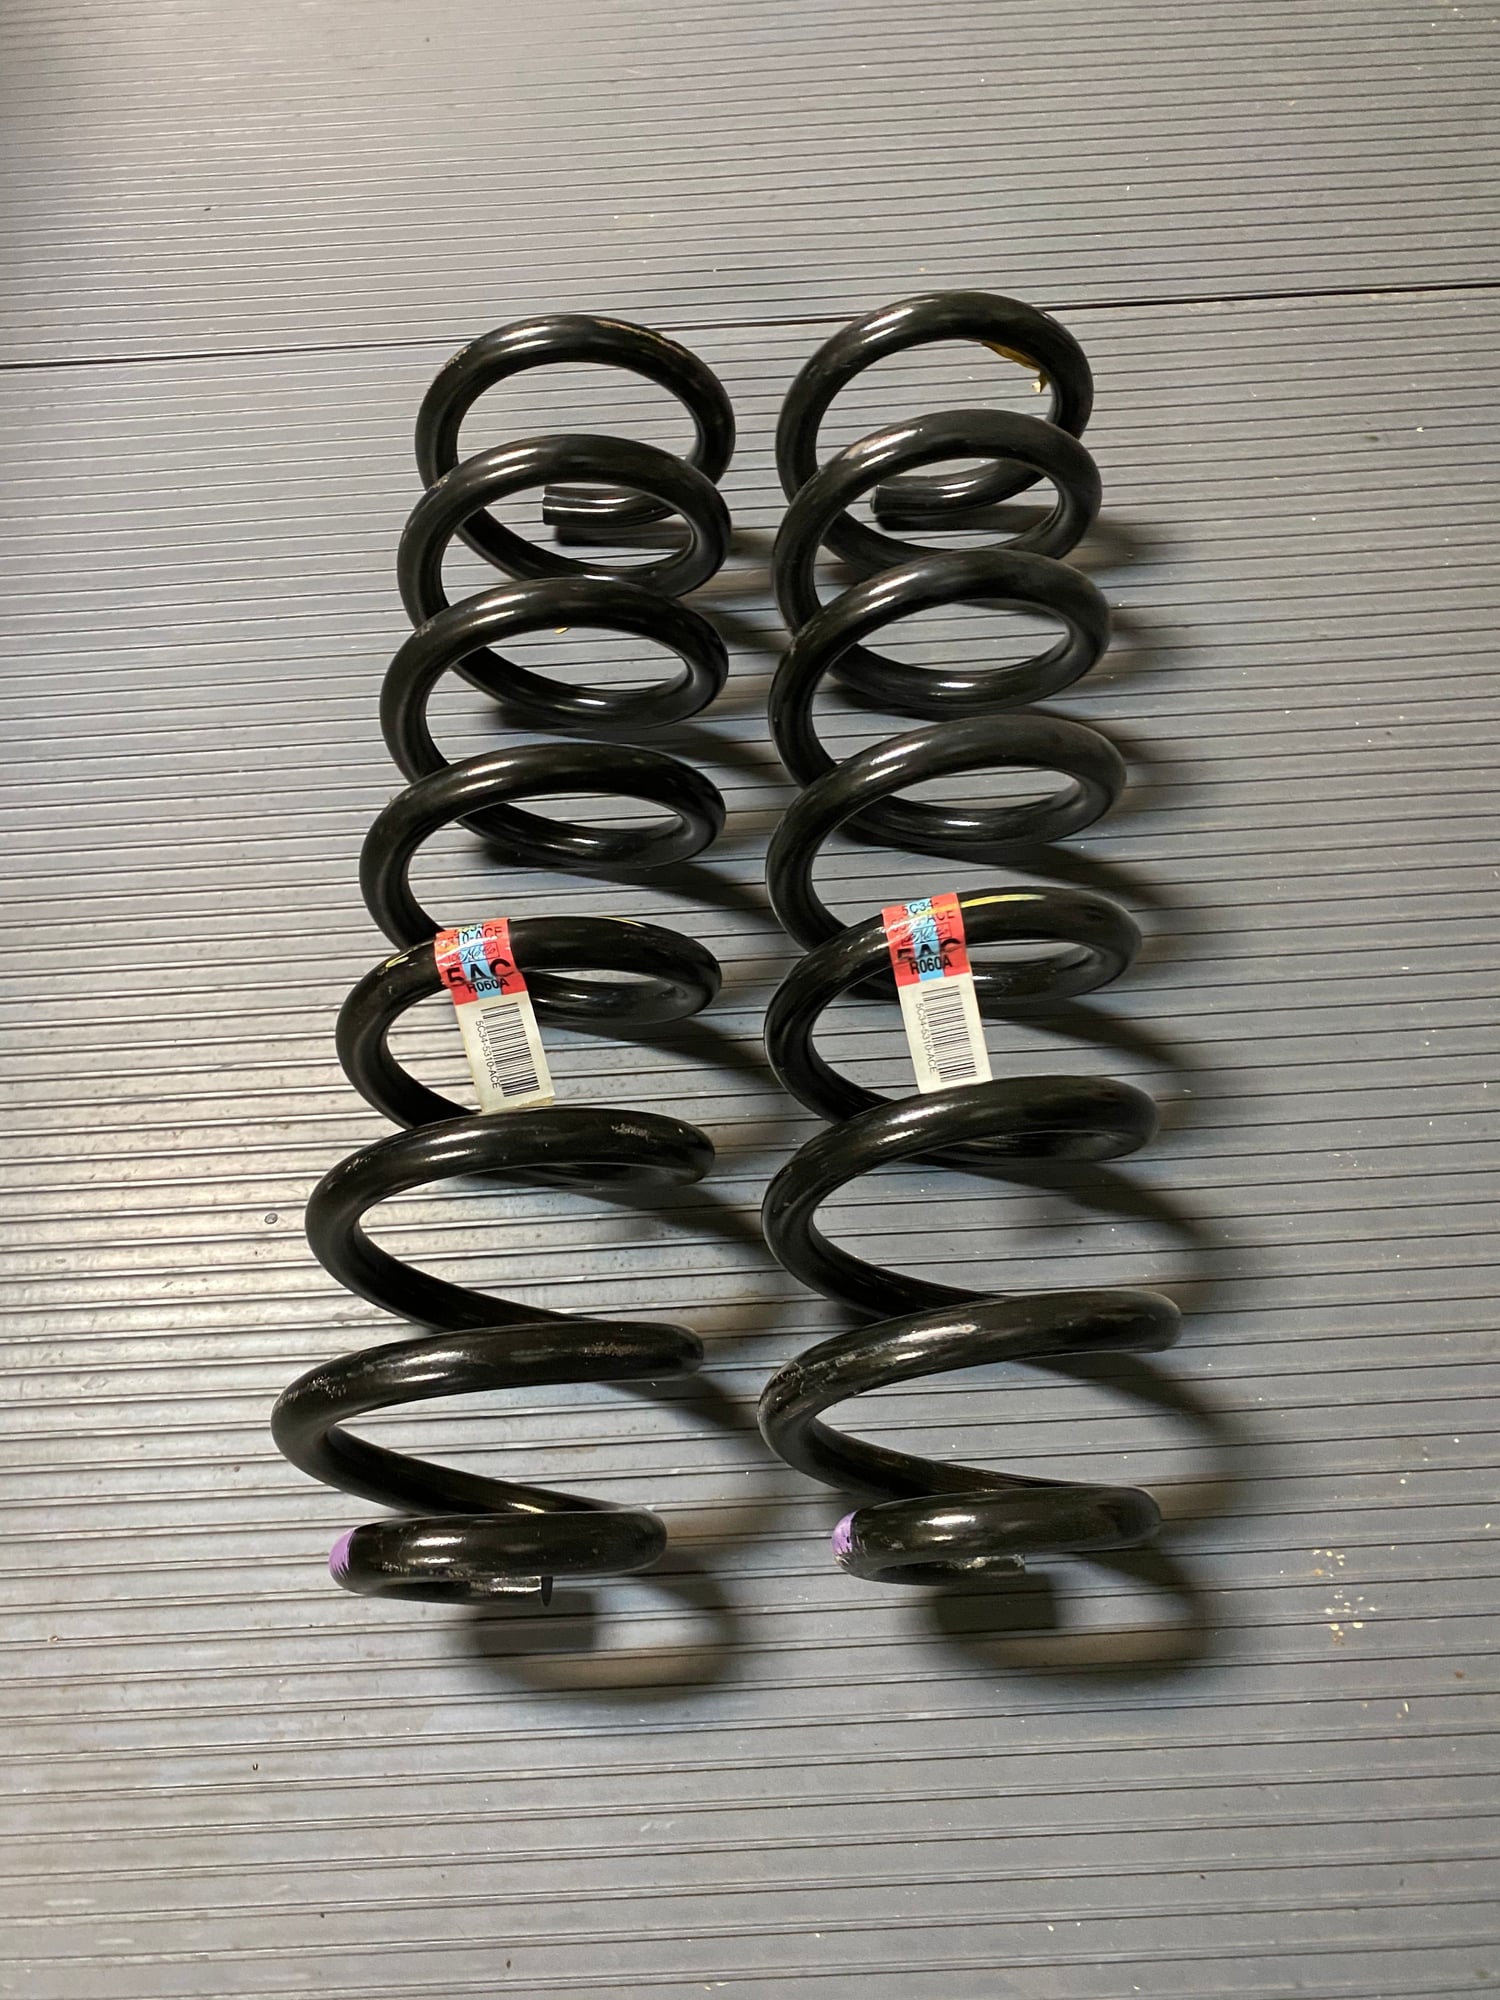 Steering/Suspension - Ford OE 6,000 lb CC Springs - Used - 2017 to 2020 Ford F Super Duty - South Tx, TX 77904, United States